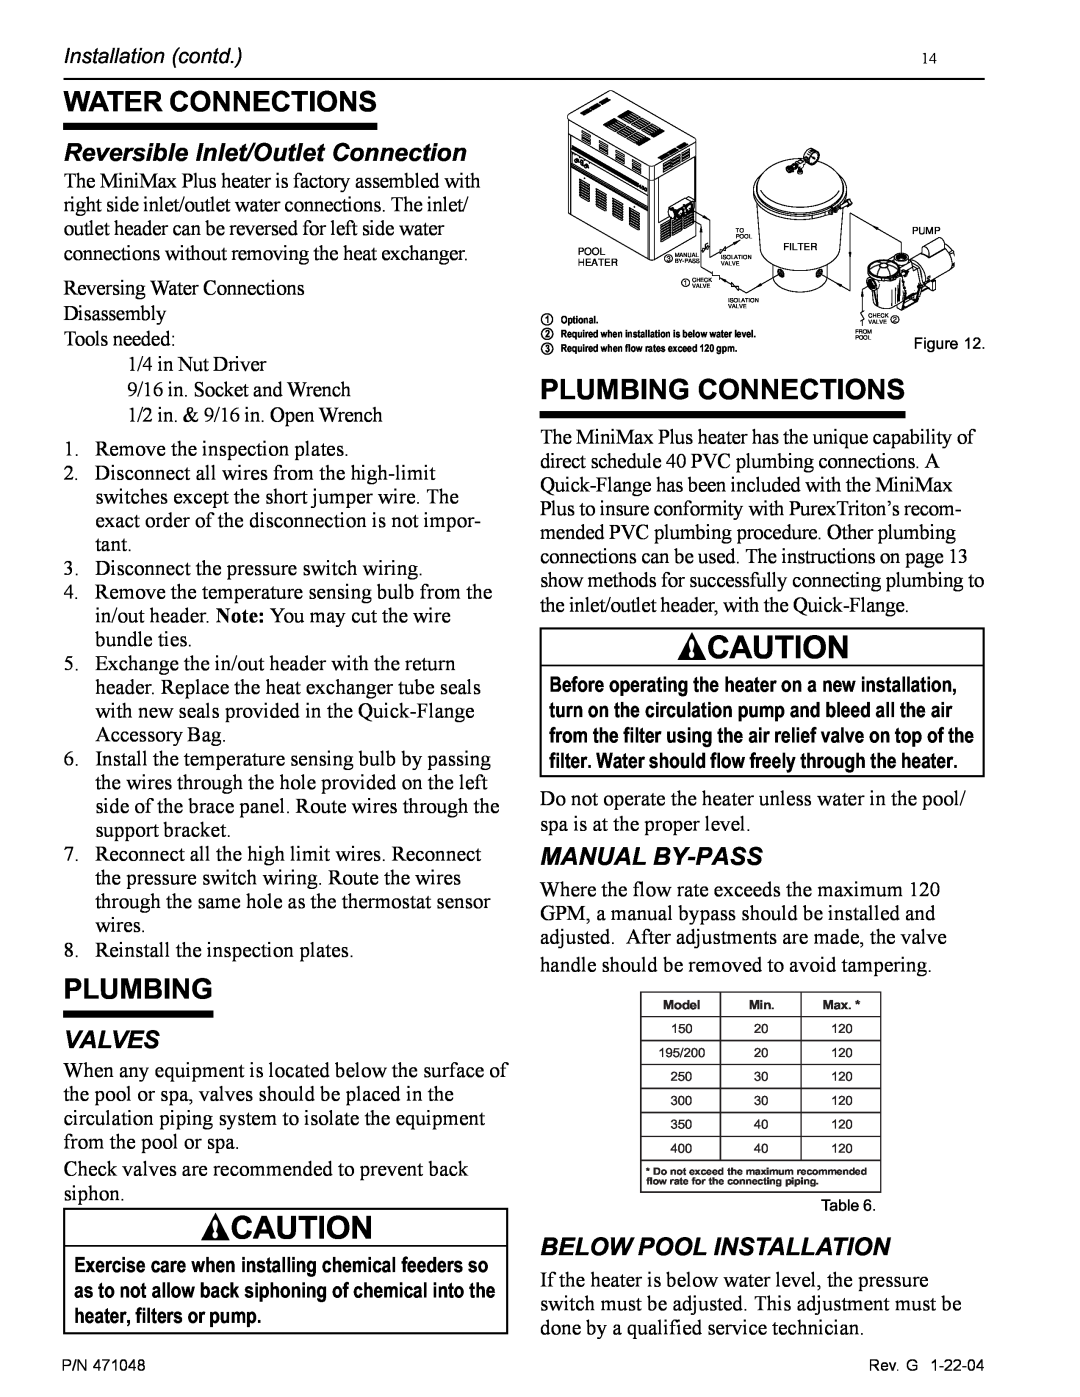 Pentair 100 Water Connections, Plumbing Connections, Reversible Inlet/Outlet Connection, Valves, Manual By-Pass 